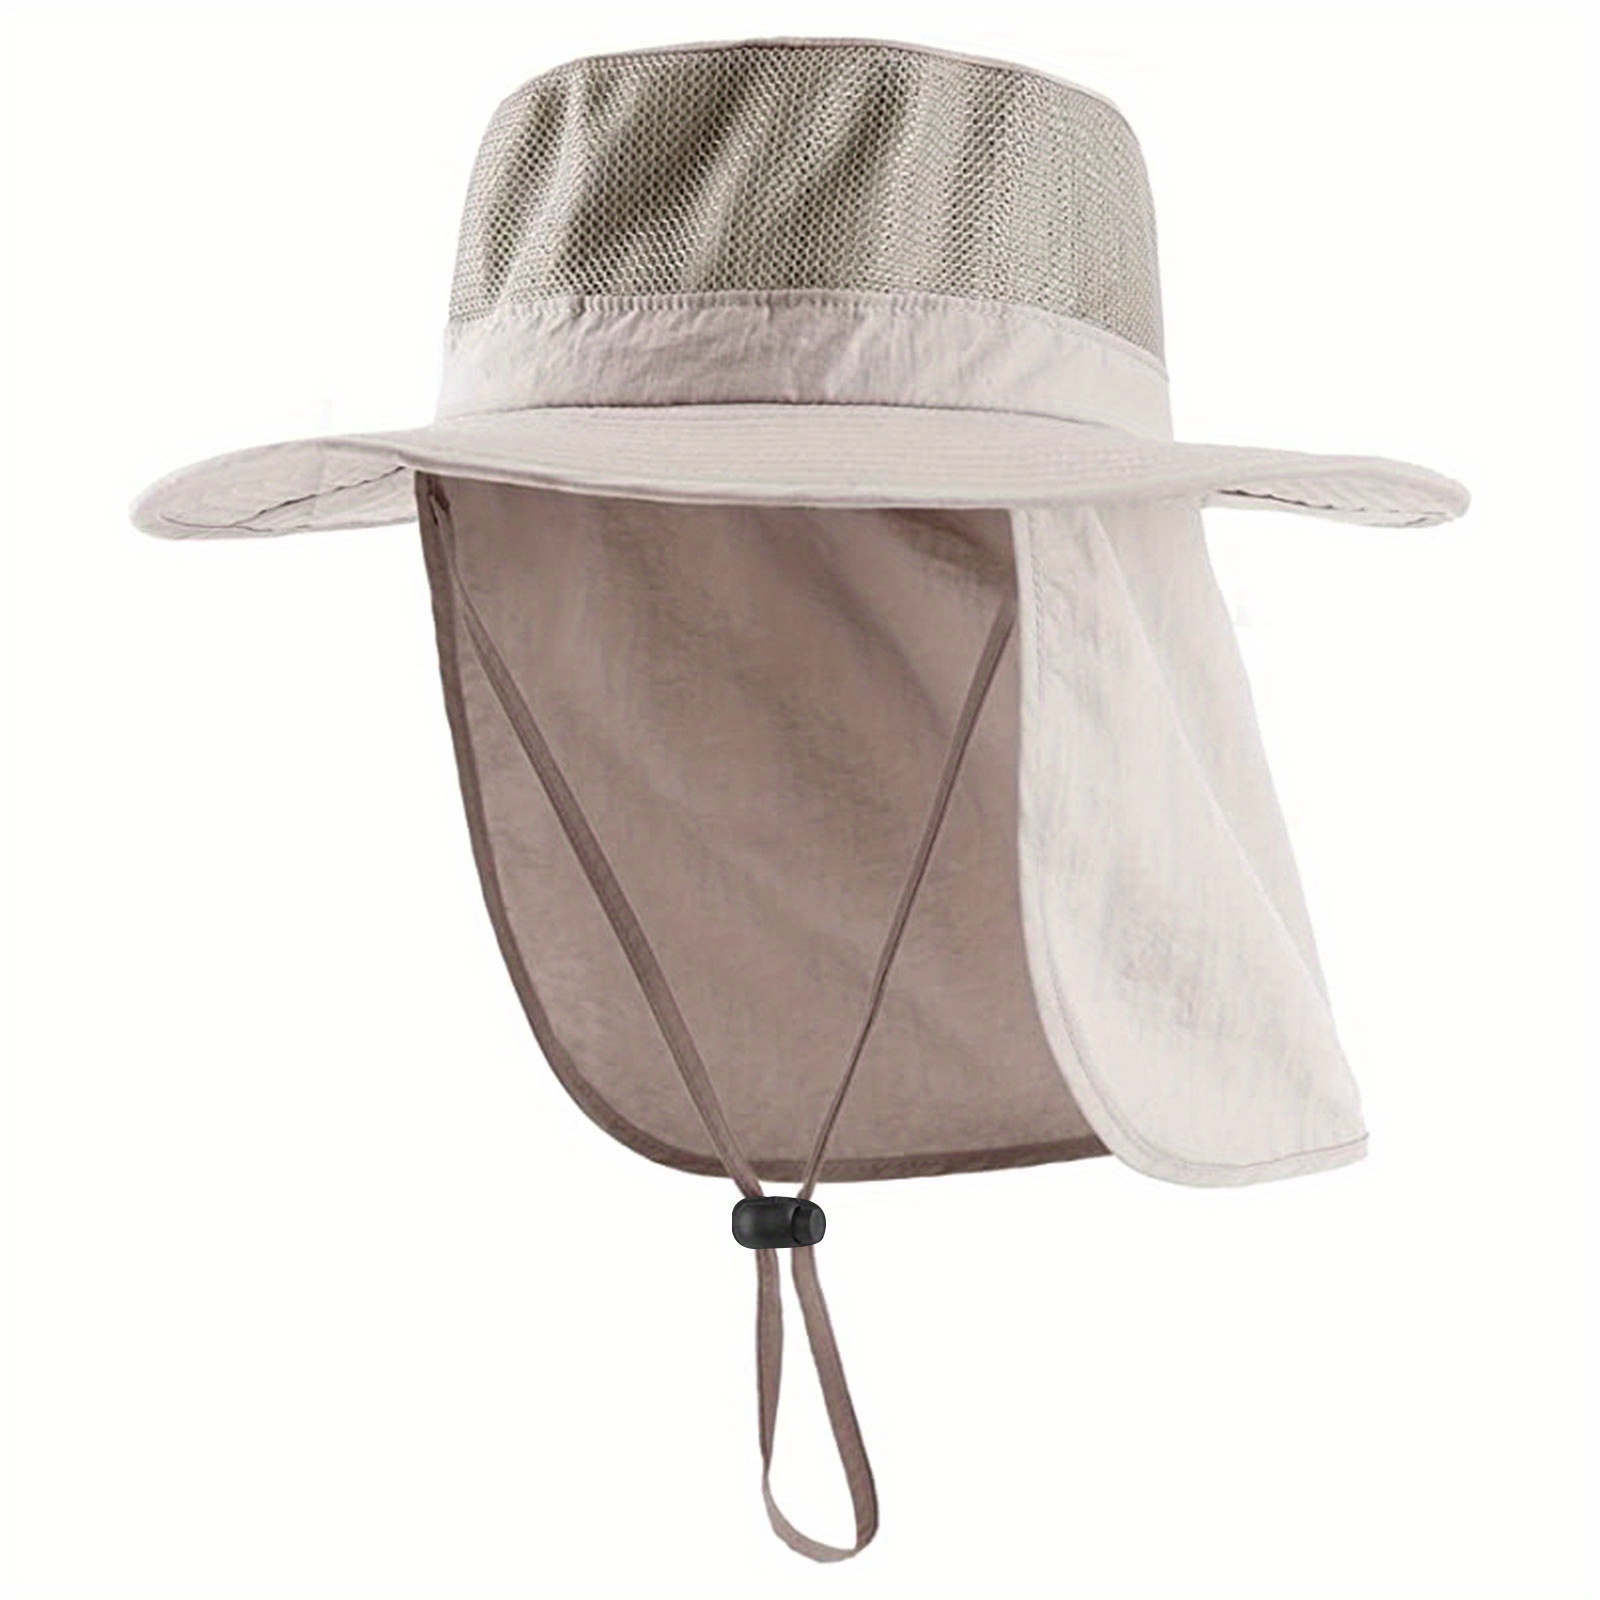 Orolay Unisex Hat Out door Sun Hat with 53+ UPF Protection Wide Brim  Fishing Hat with Neck Flap and Mask Summer Hat for Men and Women,Beige